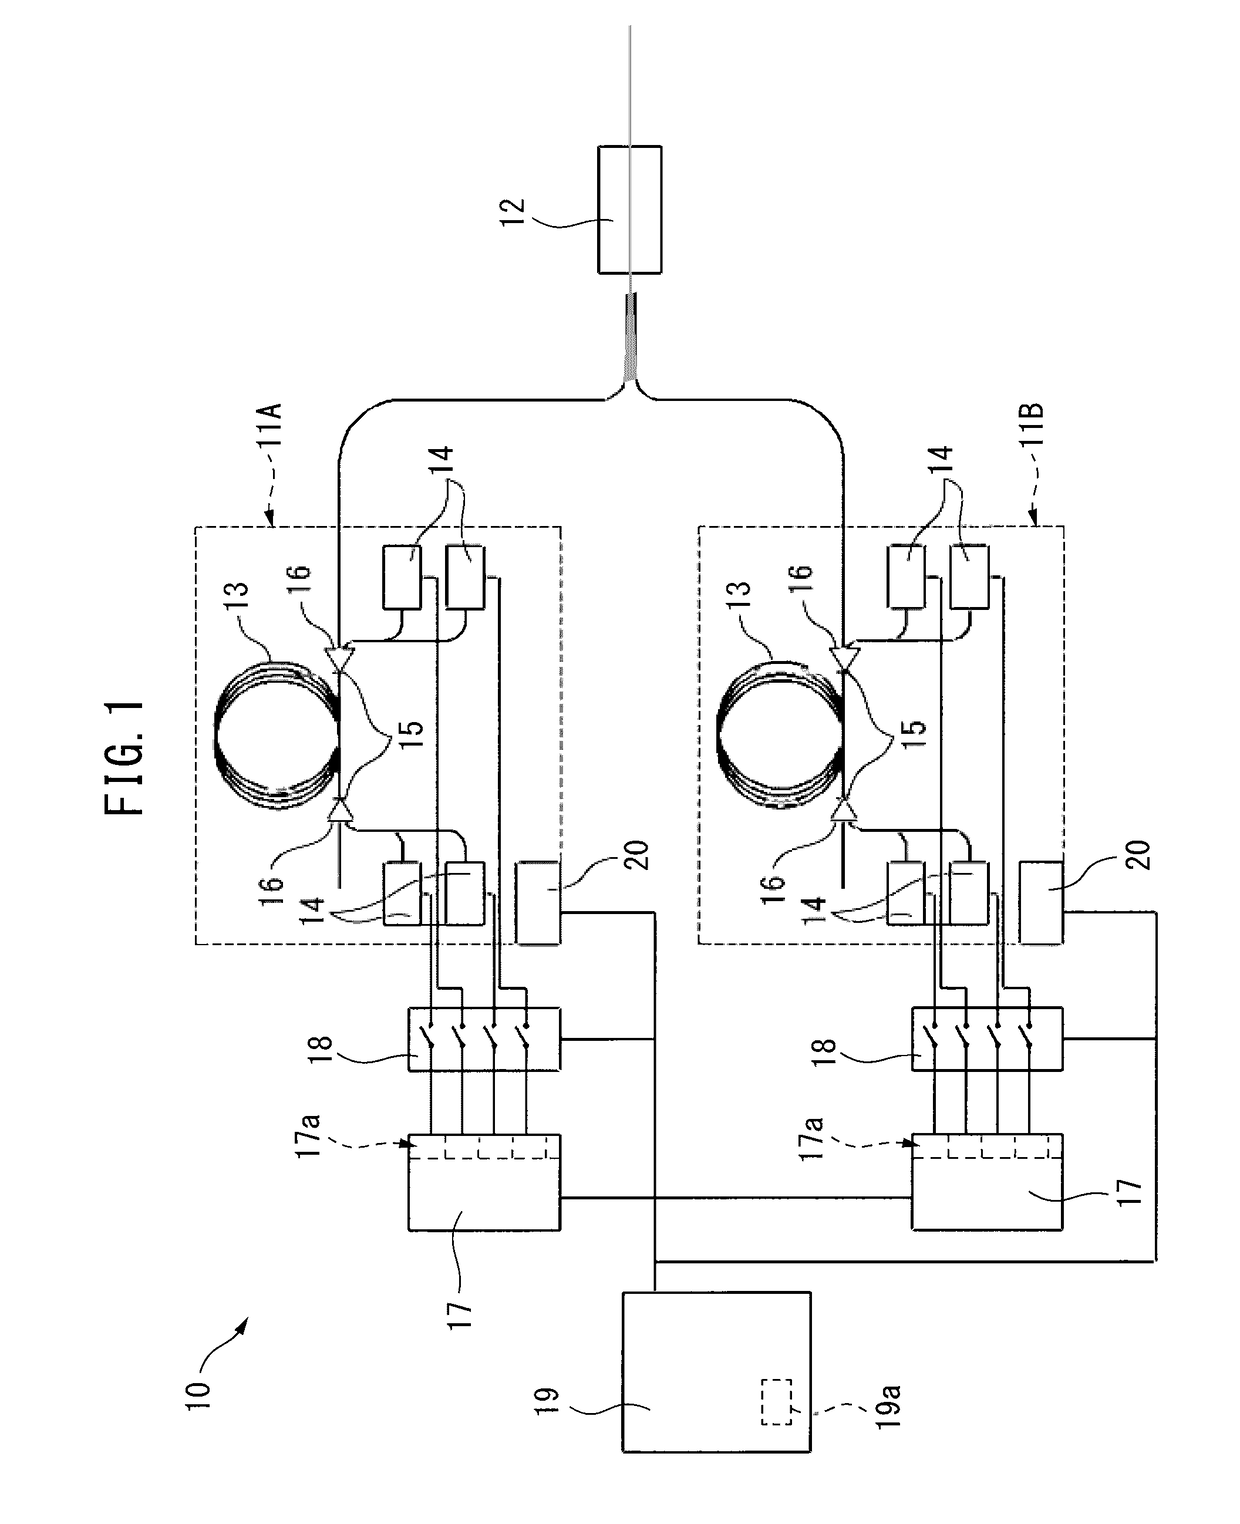 Laser oscillation device for multiplexing and outputting laser light